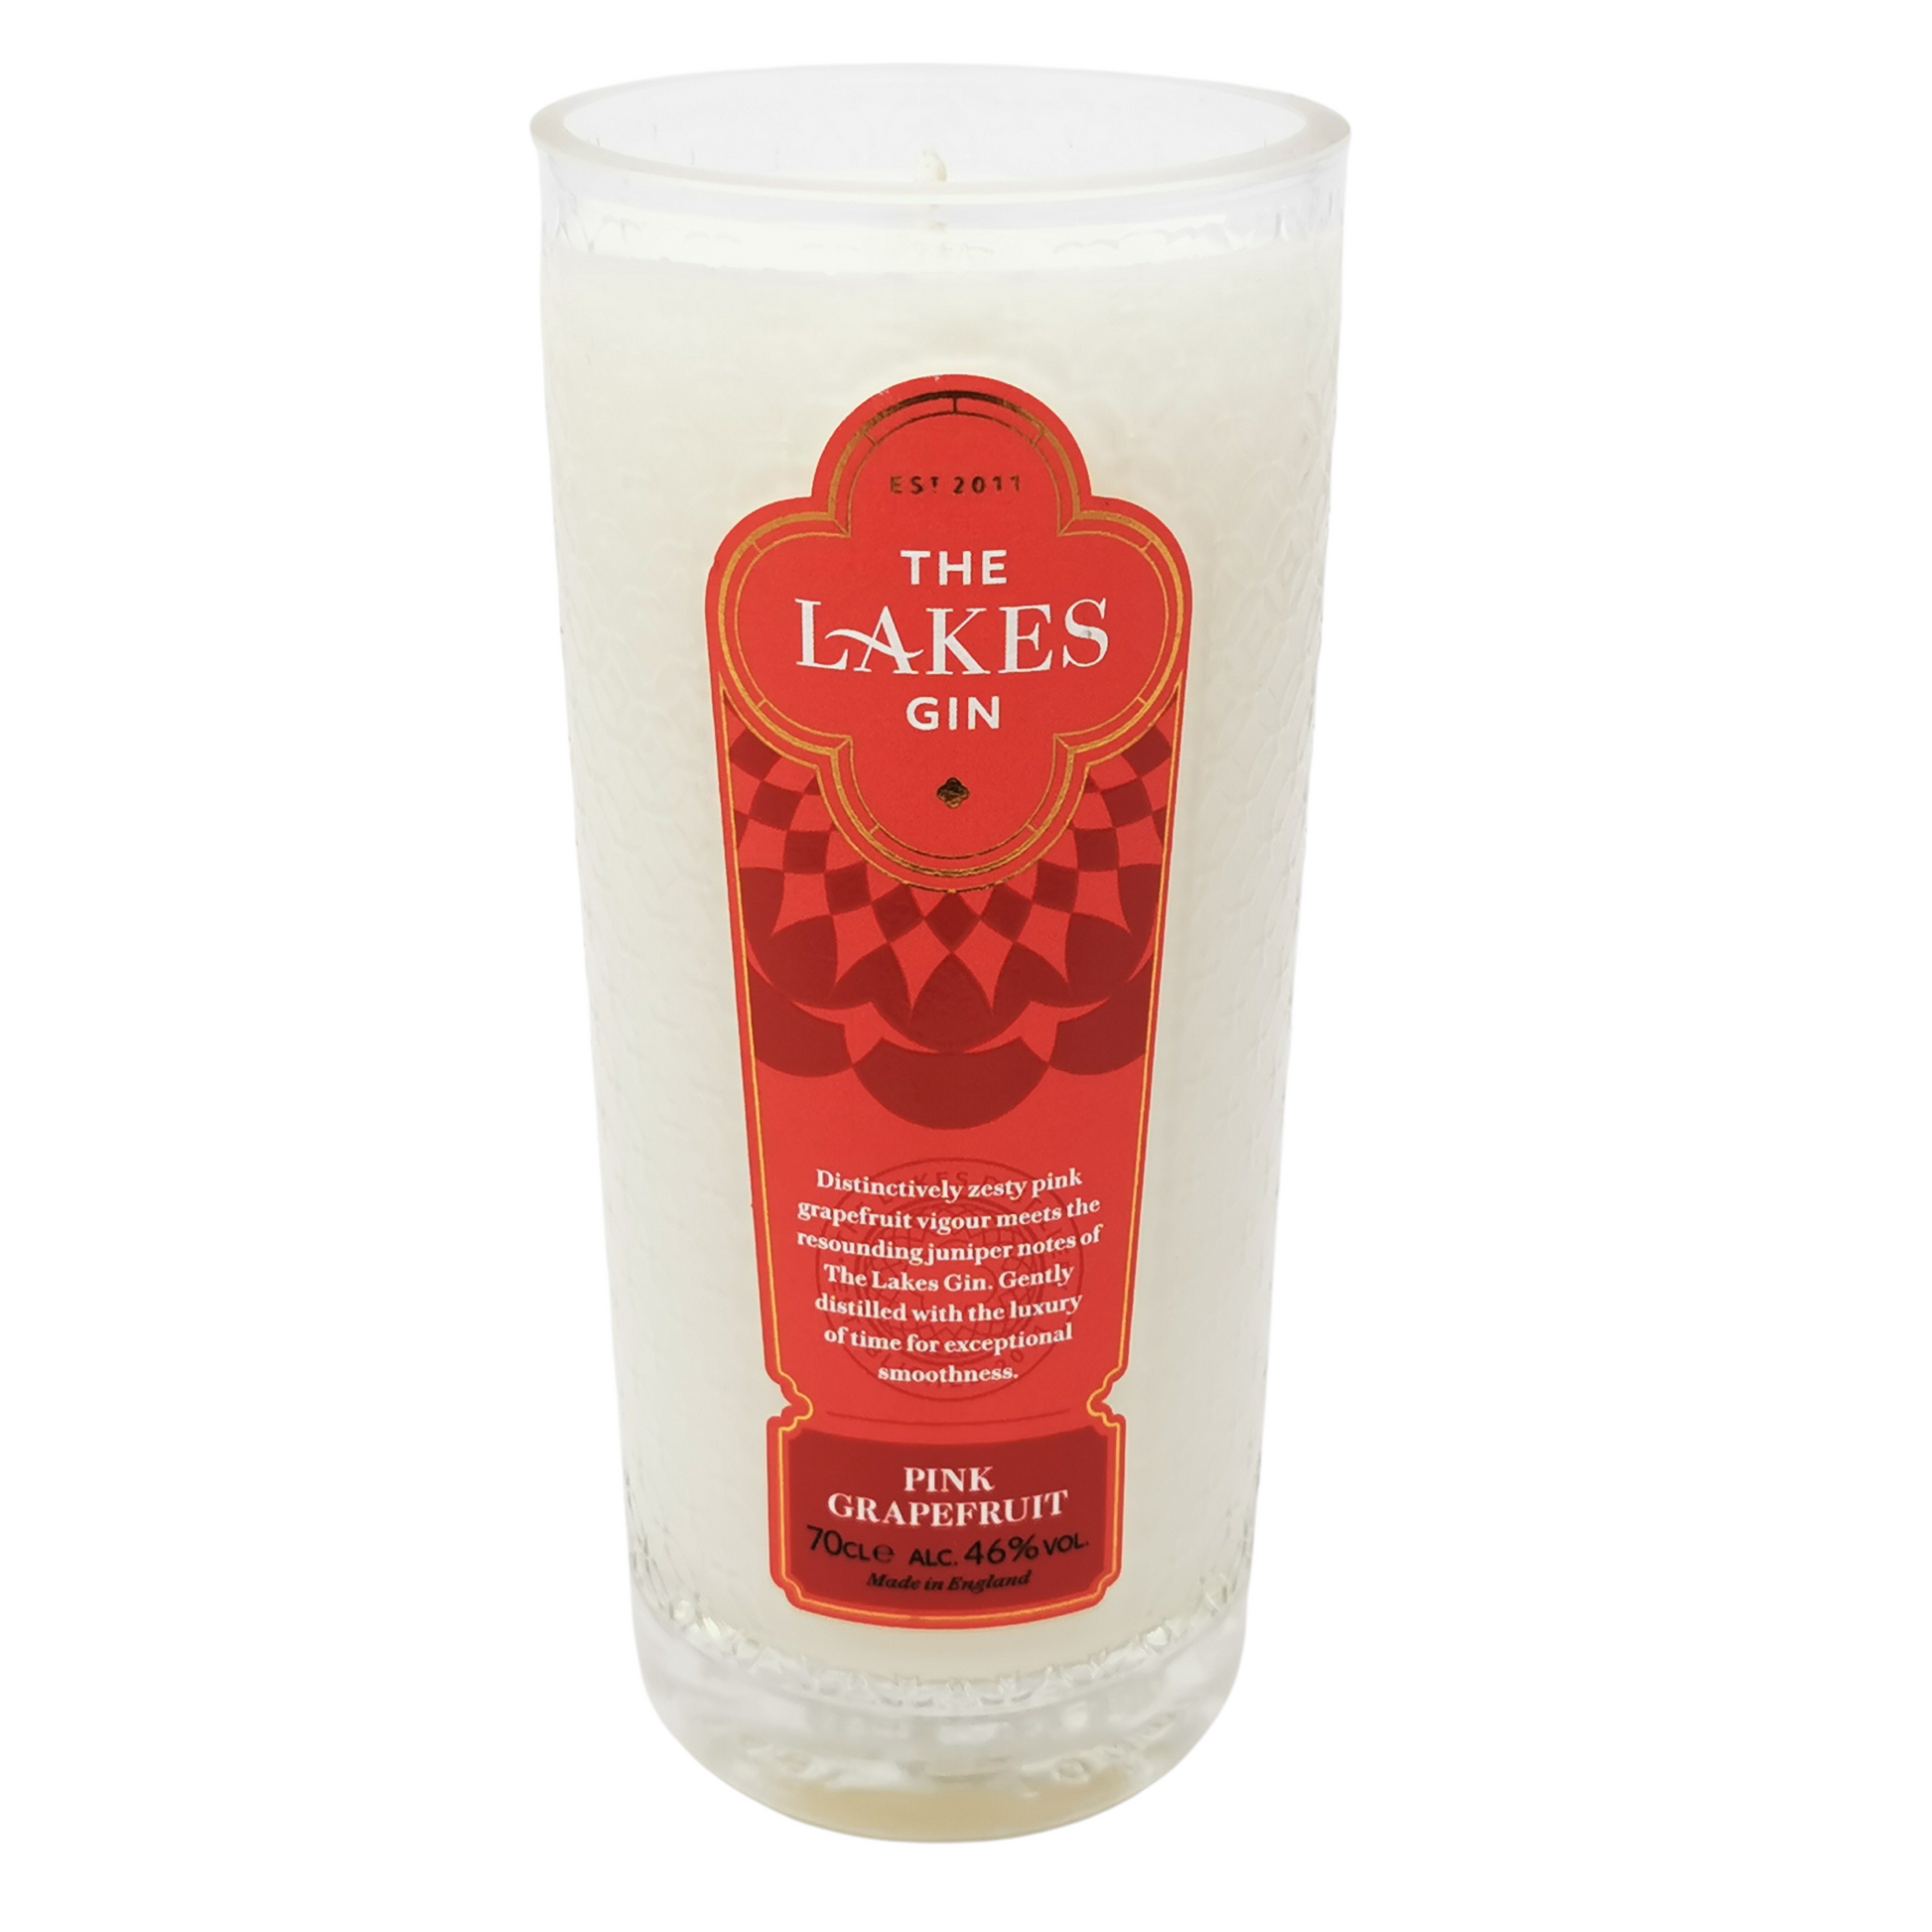 The Lakes Grapefruit Gin Bottle Candle Gin Bottle Candles Adhock Homeware